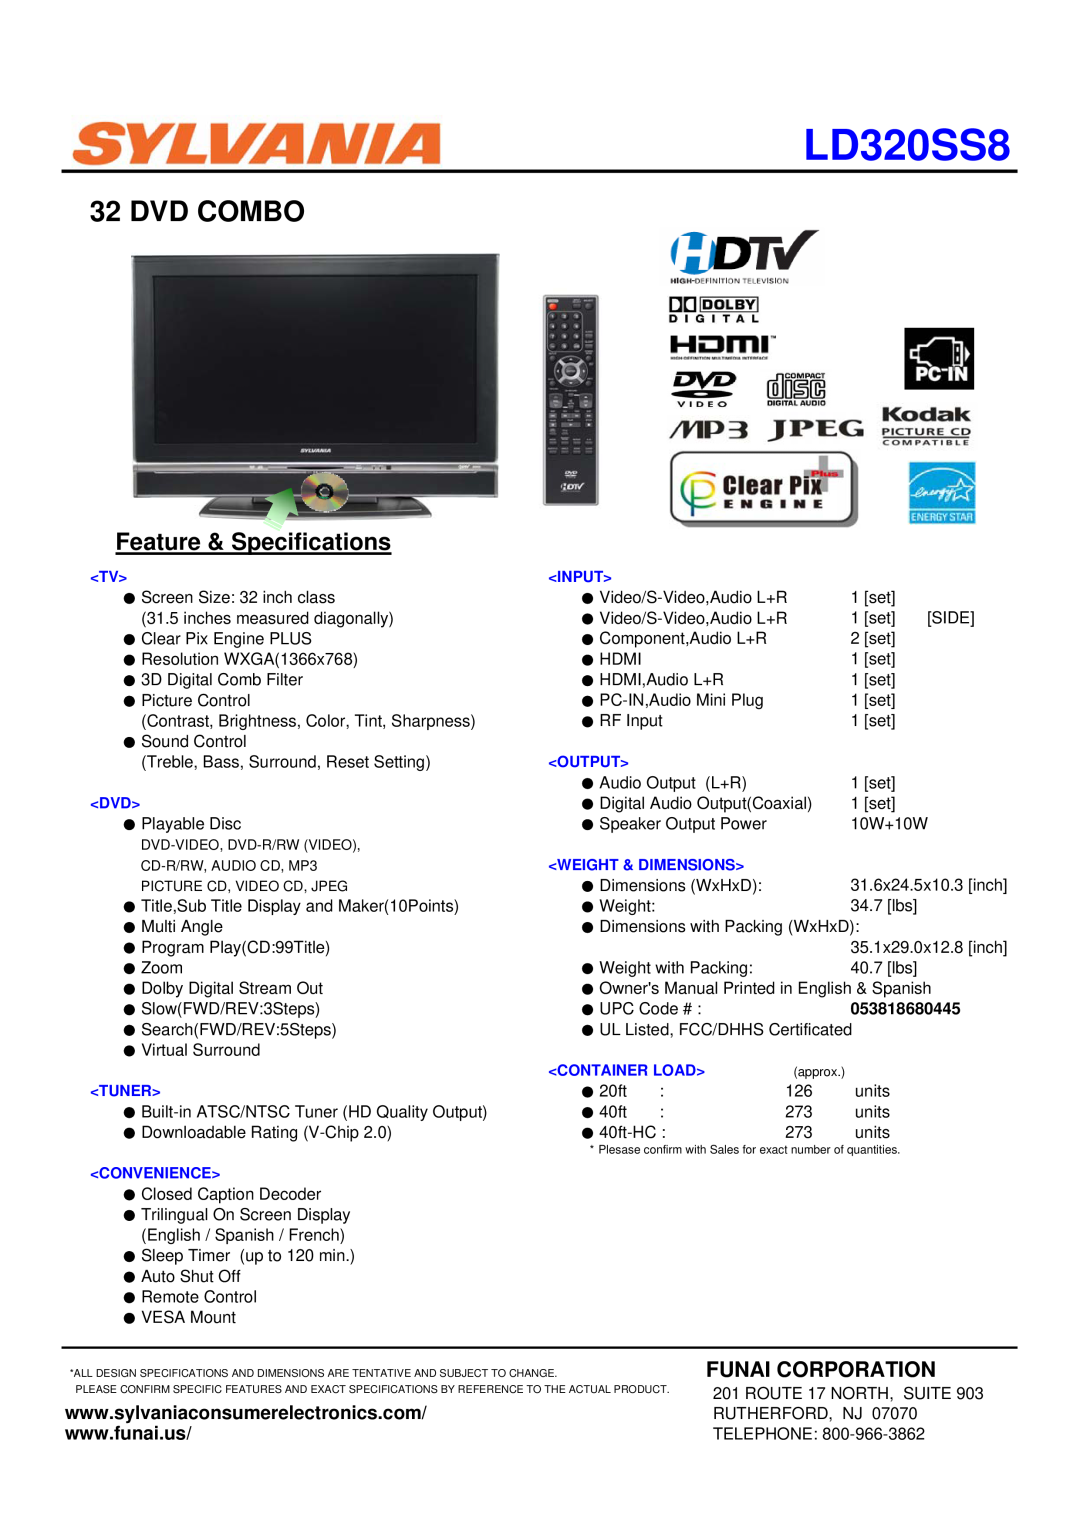 Sylvania LD320SS8 specifications Dvd Combo, Feature & Specifications, Funai Corporation, 053818680445 